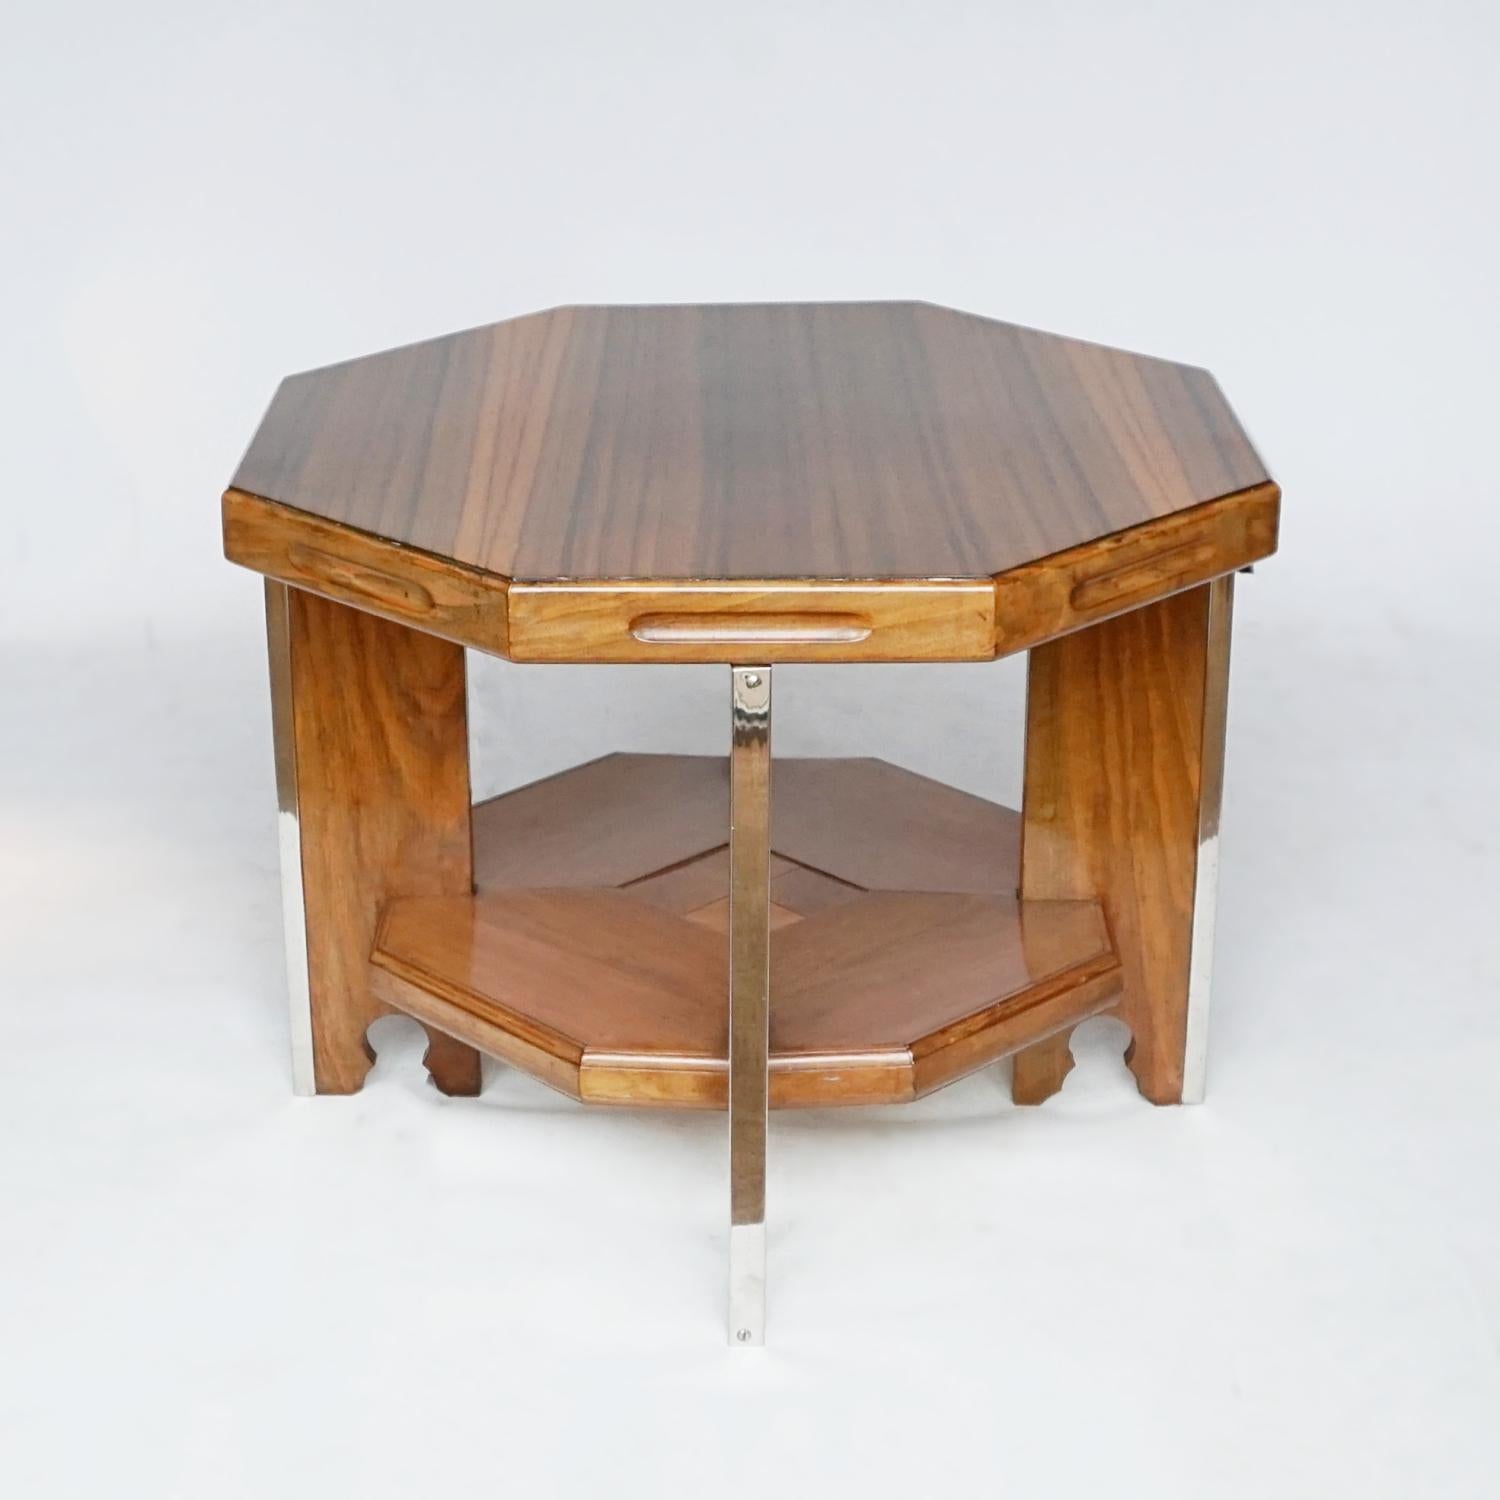 Small proportioned Art Deco octagonal coffee table. Figured walnut and solid walnut. Chromed metal banding to table legs. 

Dimensions: H 48cm W 62m D 62cm 

Origin: English

Date: Circa 1935

Item Number: 312211

All of our furniture is